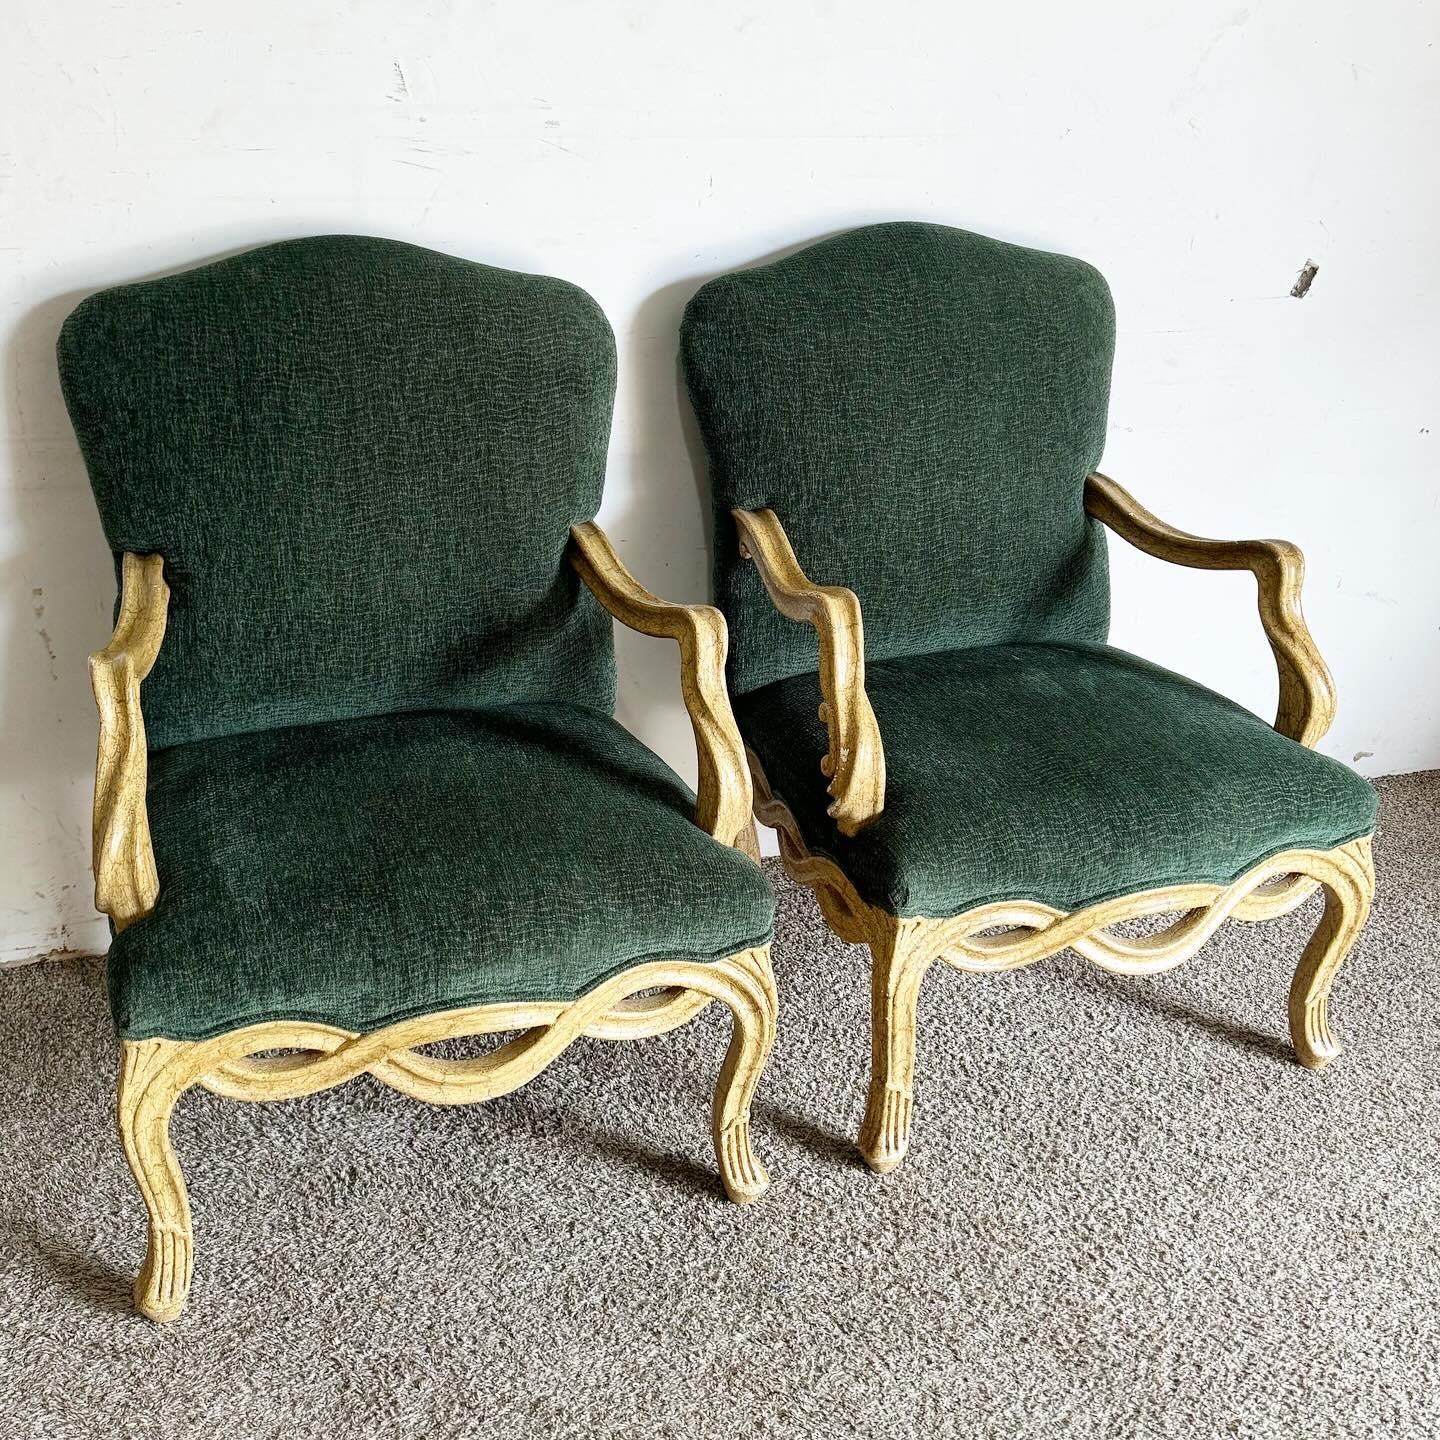 Embrace the timeless elegance of the French Provincial Green Armchairs, enhanced by a unique twisting wooden frame. These armchairs combine traditional craftsmanship with a modern twist, featuring intricately carved wooden frames and rich green